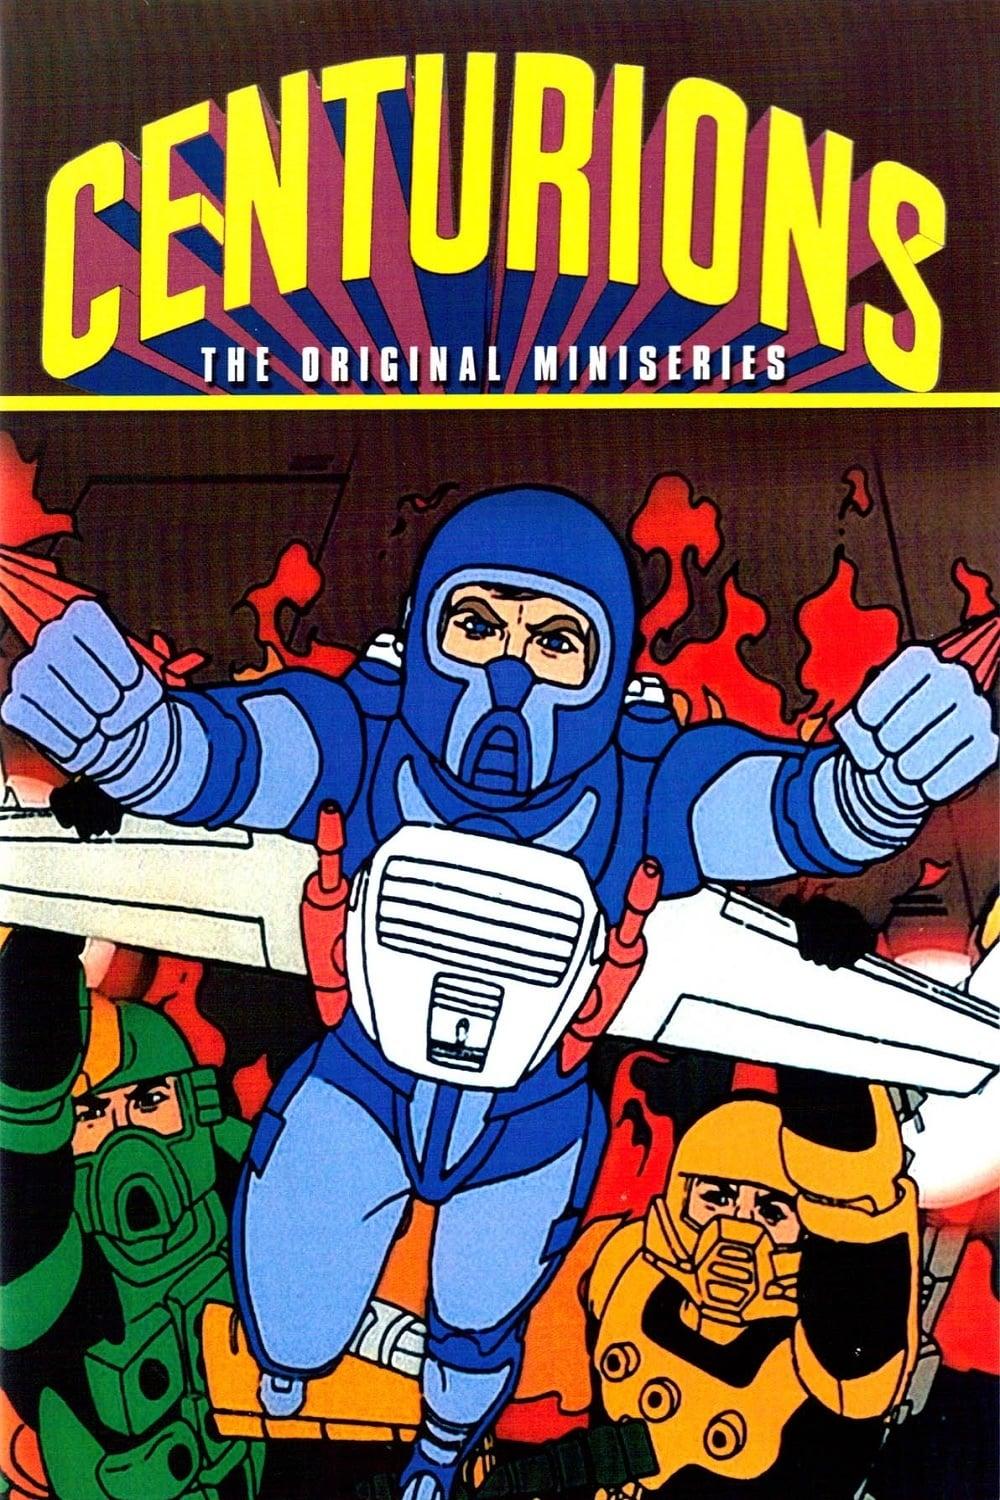 The Centurions poster